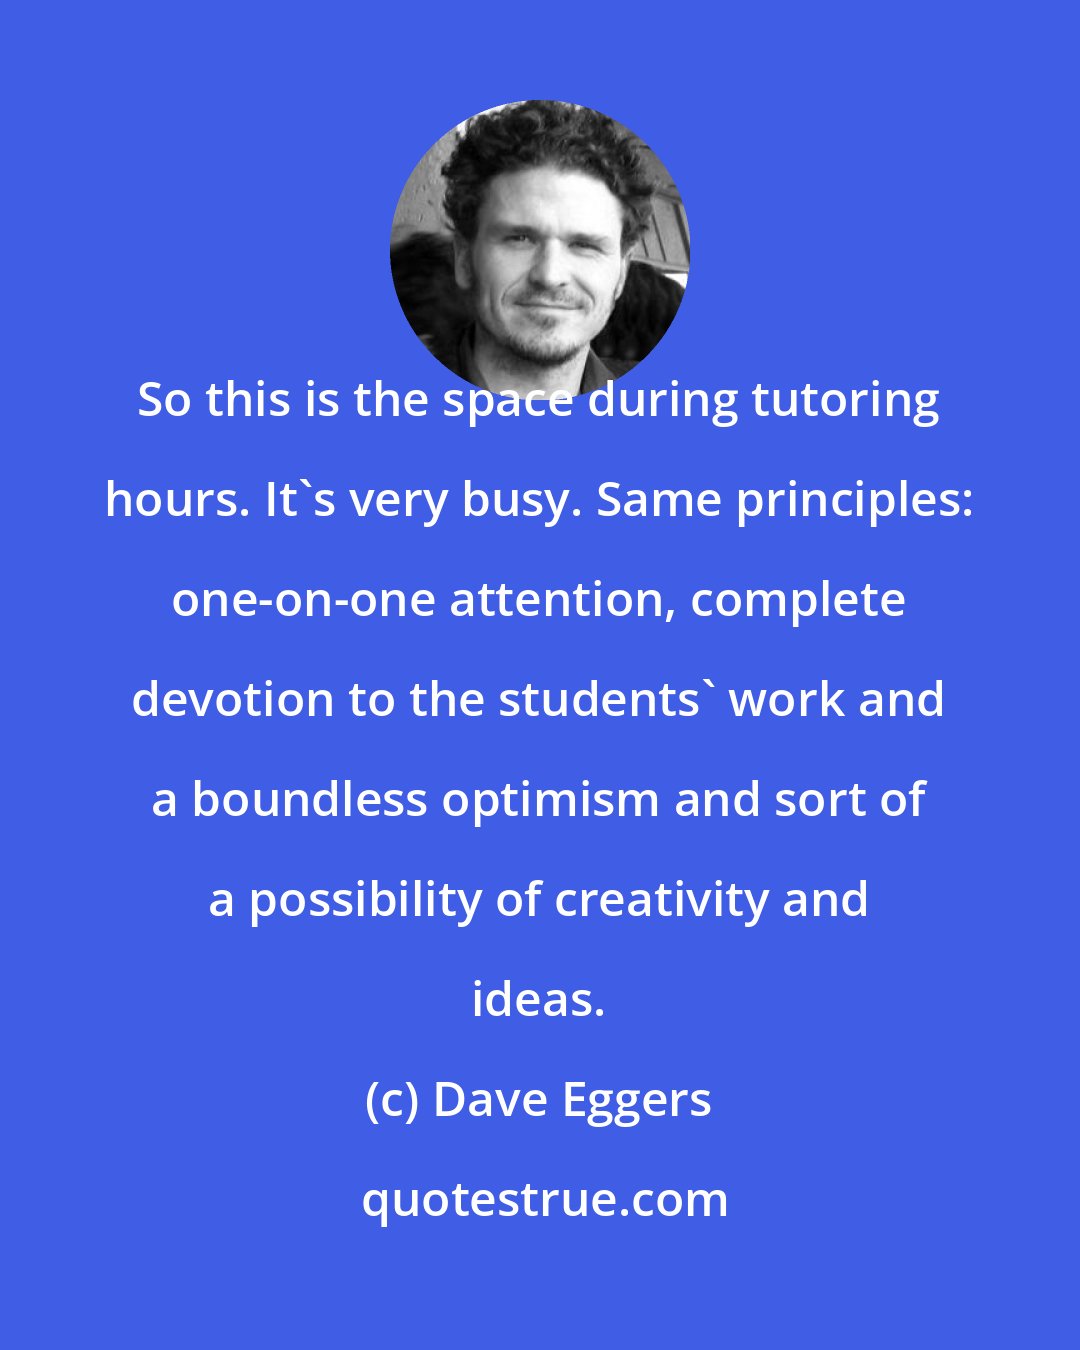 Dave Eggers: So this is the space during tutoring hours. It's very busy. Same principles: one-on-one attention, complete devotion to the students' work and a boundless optimism and sort of a possibility of creativity and ideas.